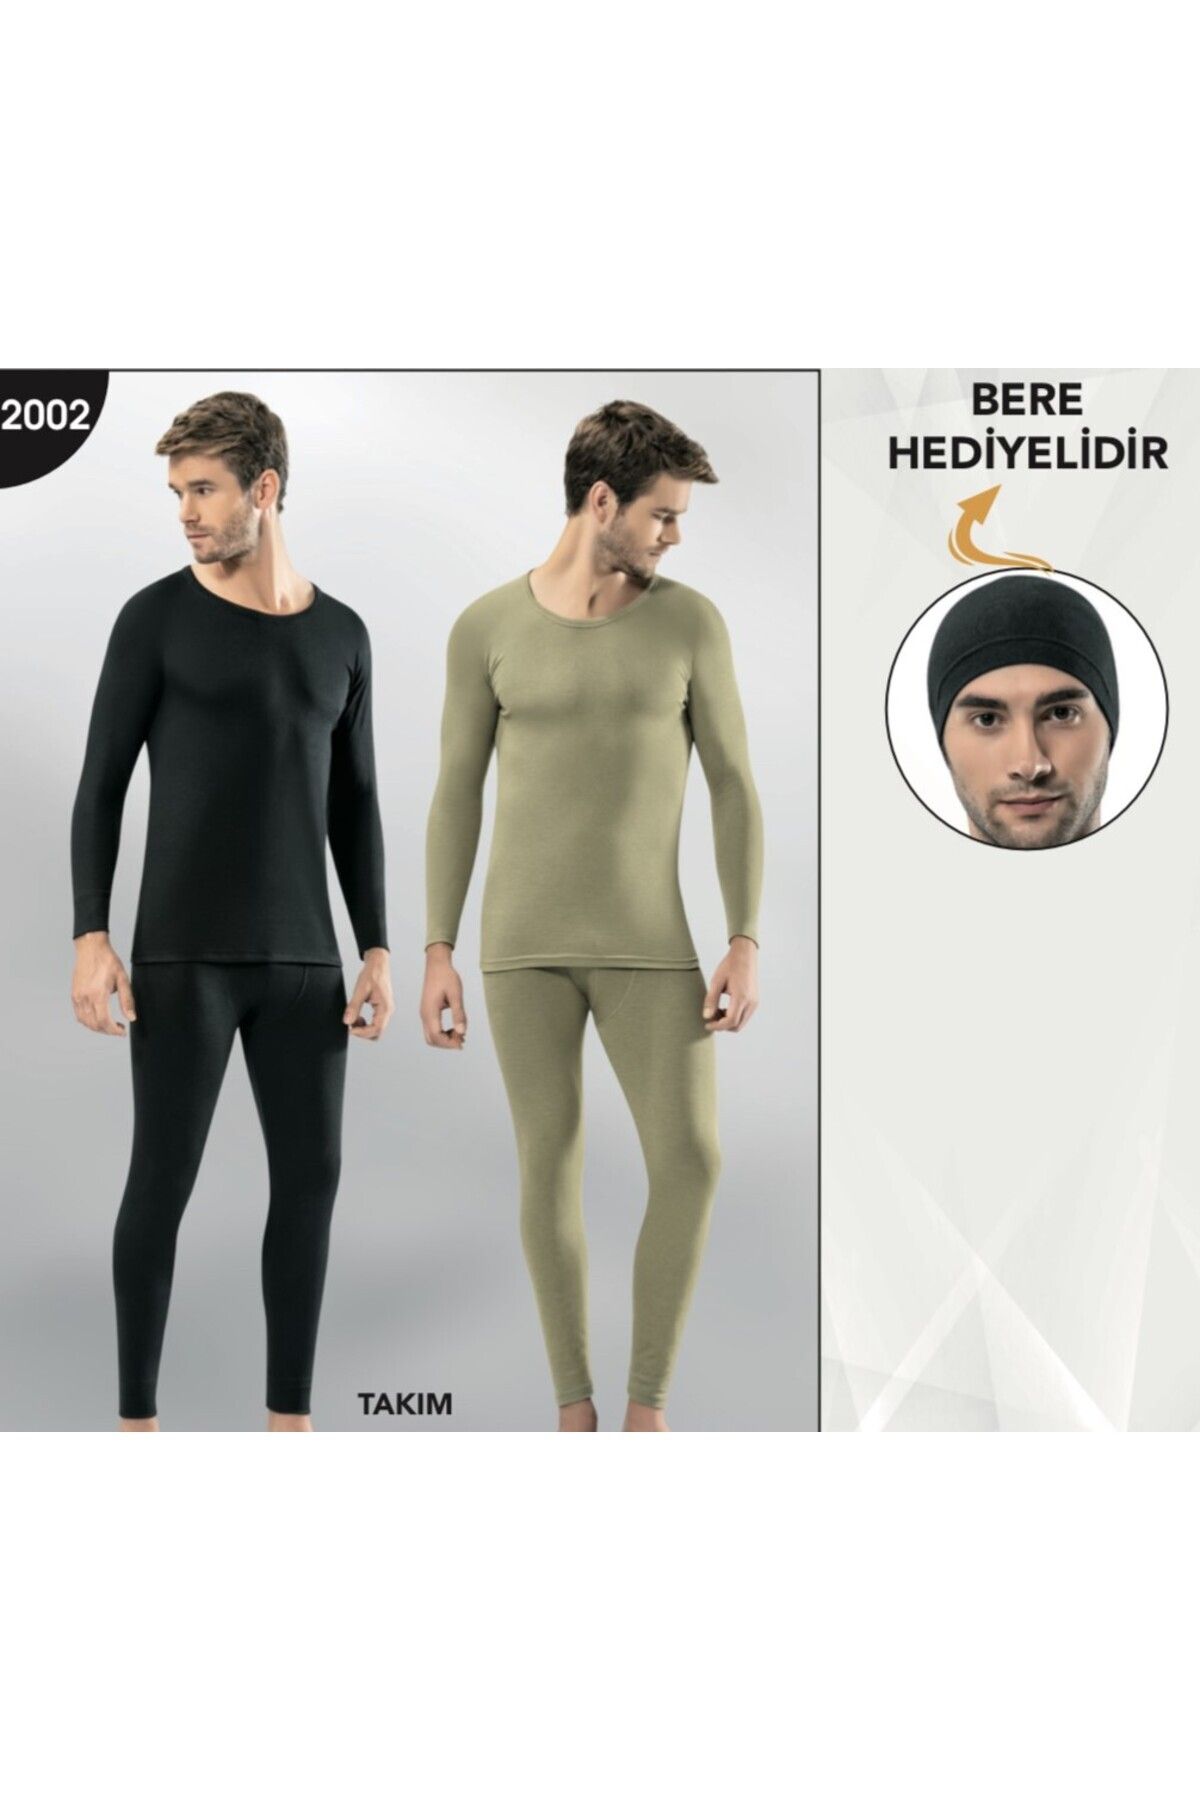 CSN CASANO 7ZTA7GRP7.4.008 Thermal Men's Military Thermal Underwear, Top  and Bottom Set, Beret is a Gift. - Trendyol